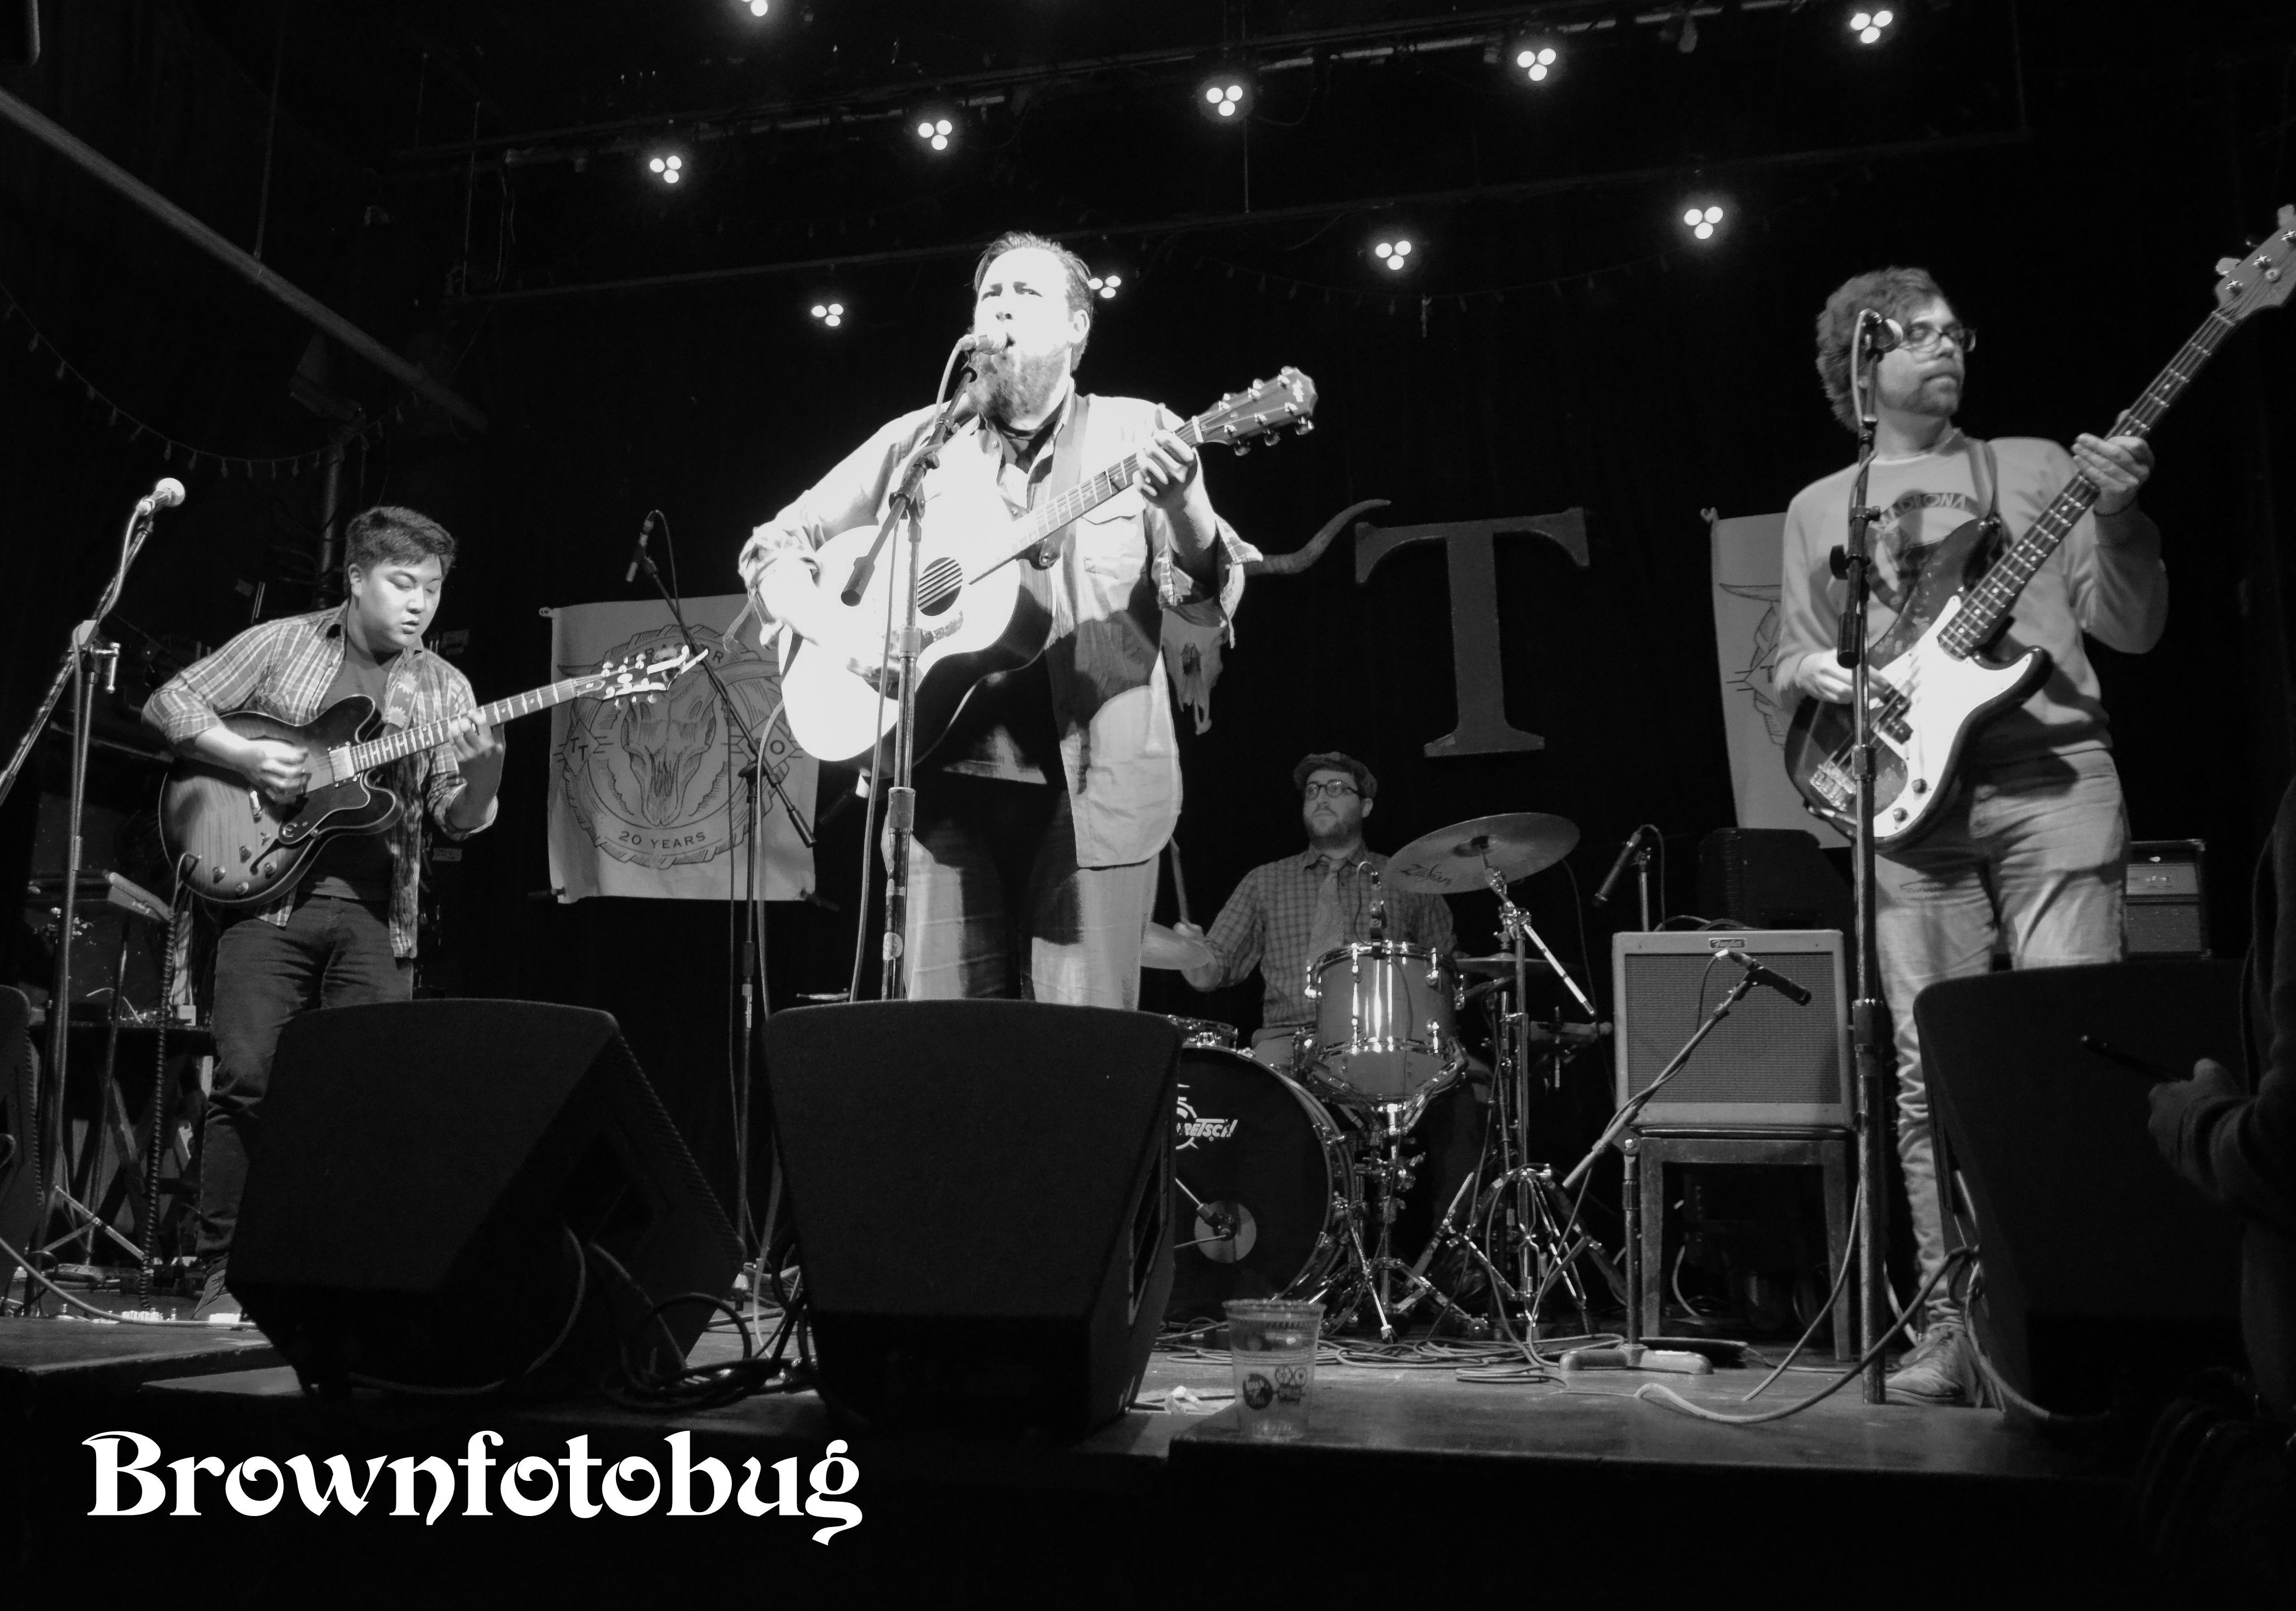 Brite Lines Live at Tractor Tavern (Photo by Arlene Brown)